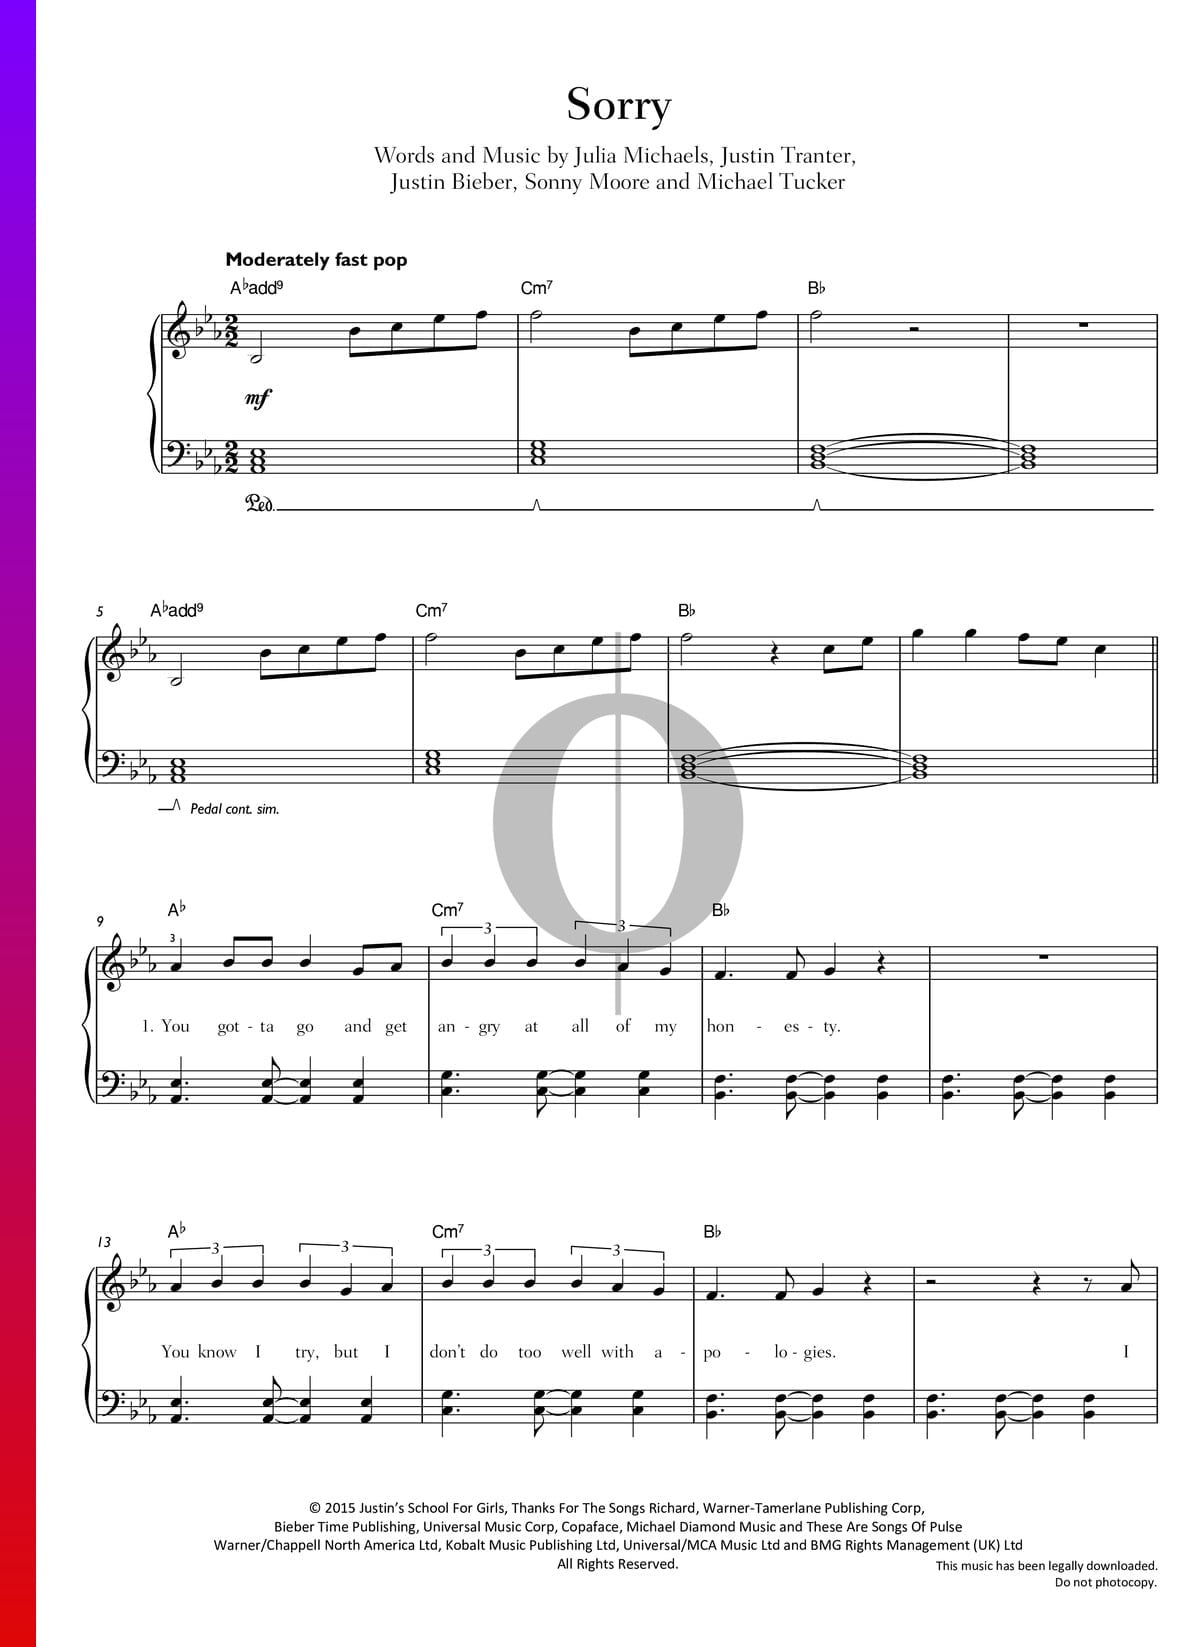 Song Worksheet: Sorry by Justin Bieber